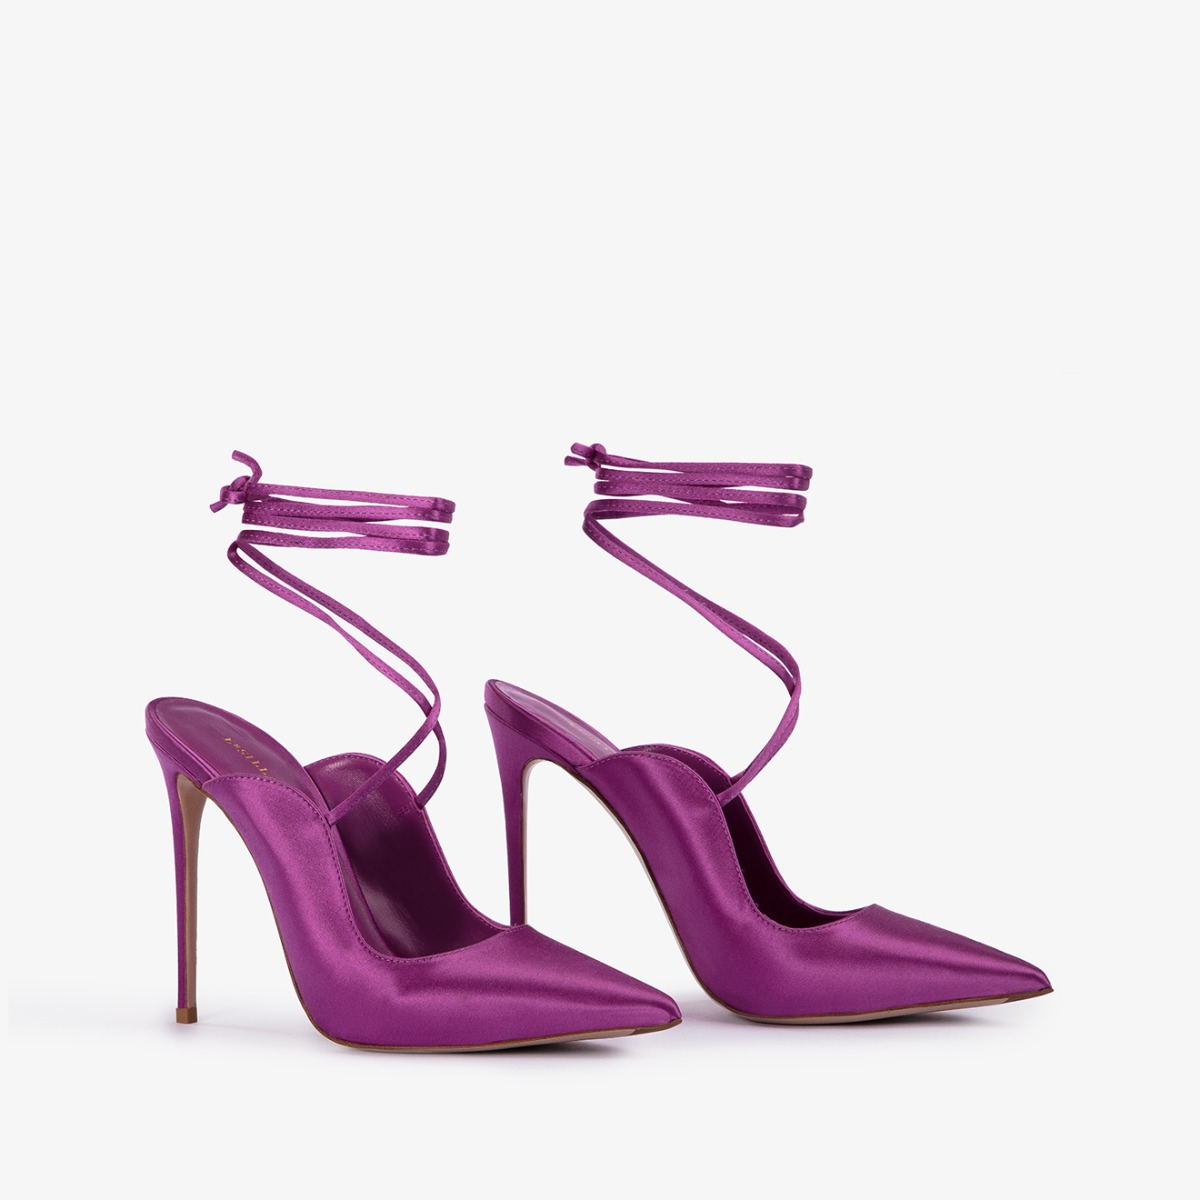 IVY SLINGBACK 120 mm - Le Silla official outlet